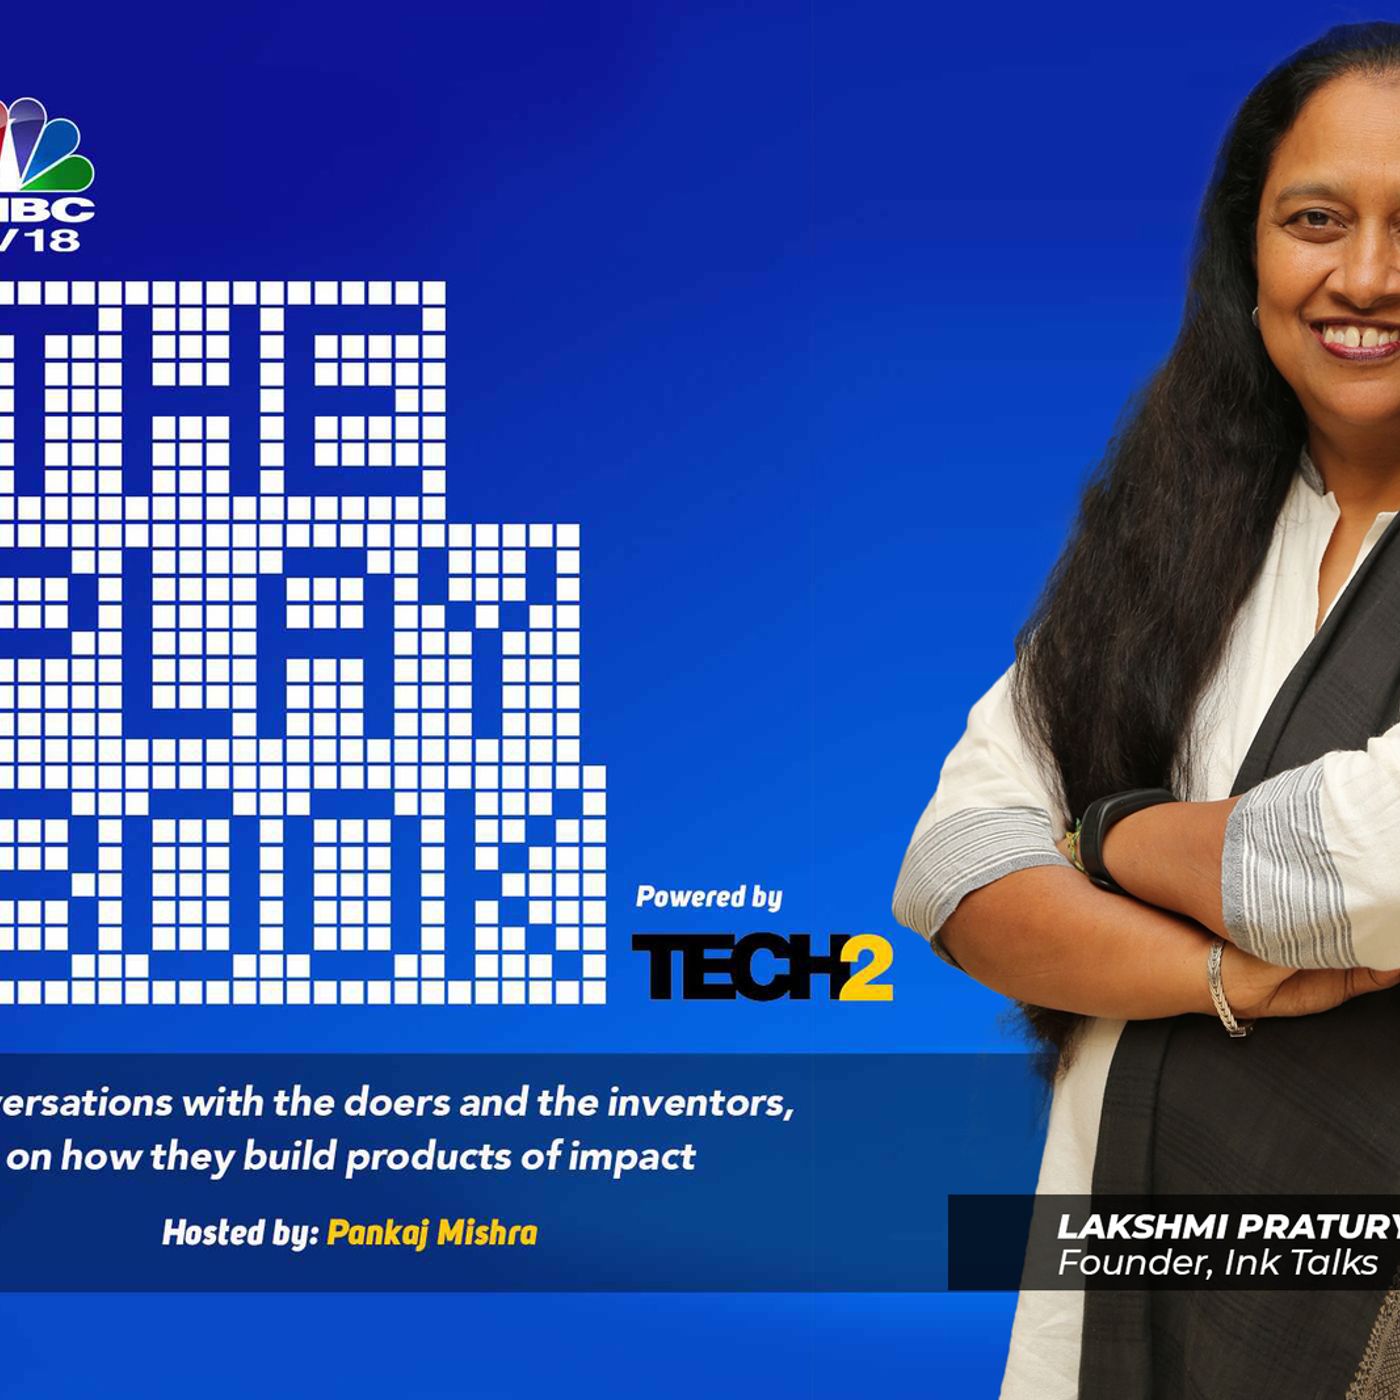 5: The Playbook: Lakshmi Pratury on lessons from TED and INK Talks in building communities